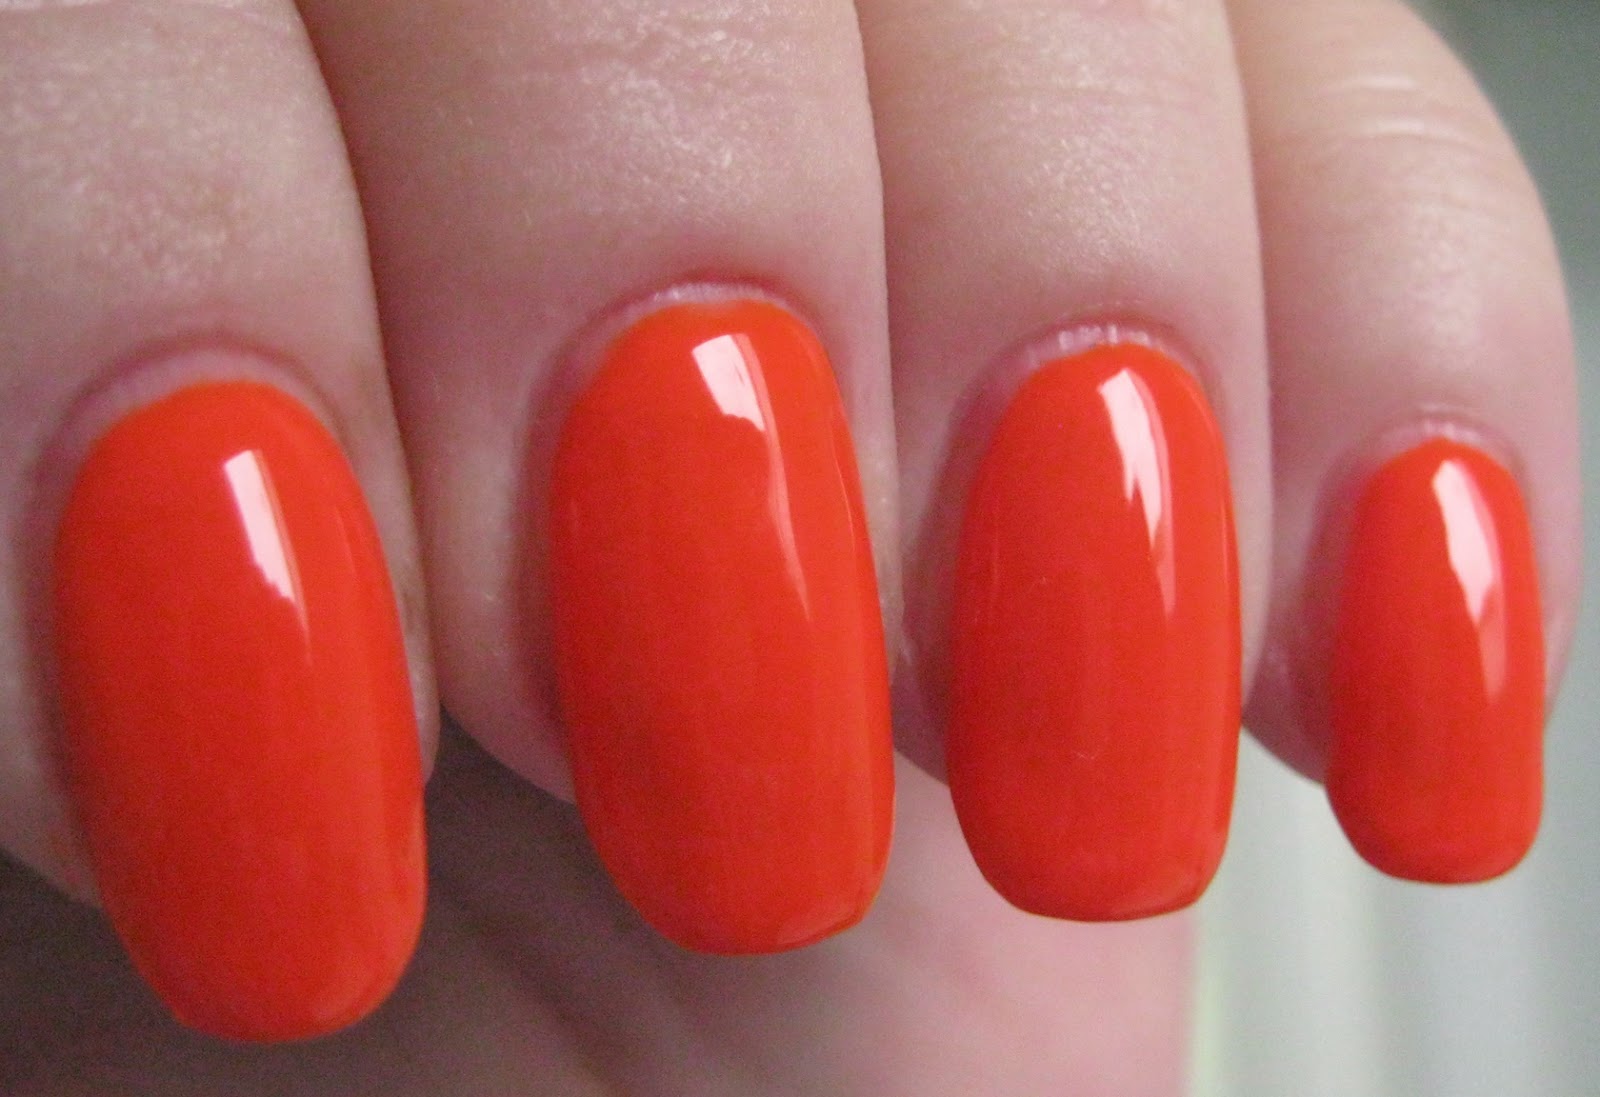 10. Orly Nail Lacquer in "Orange Punch" - wide 2